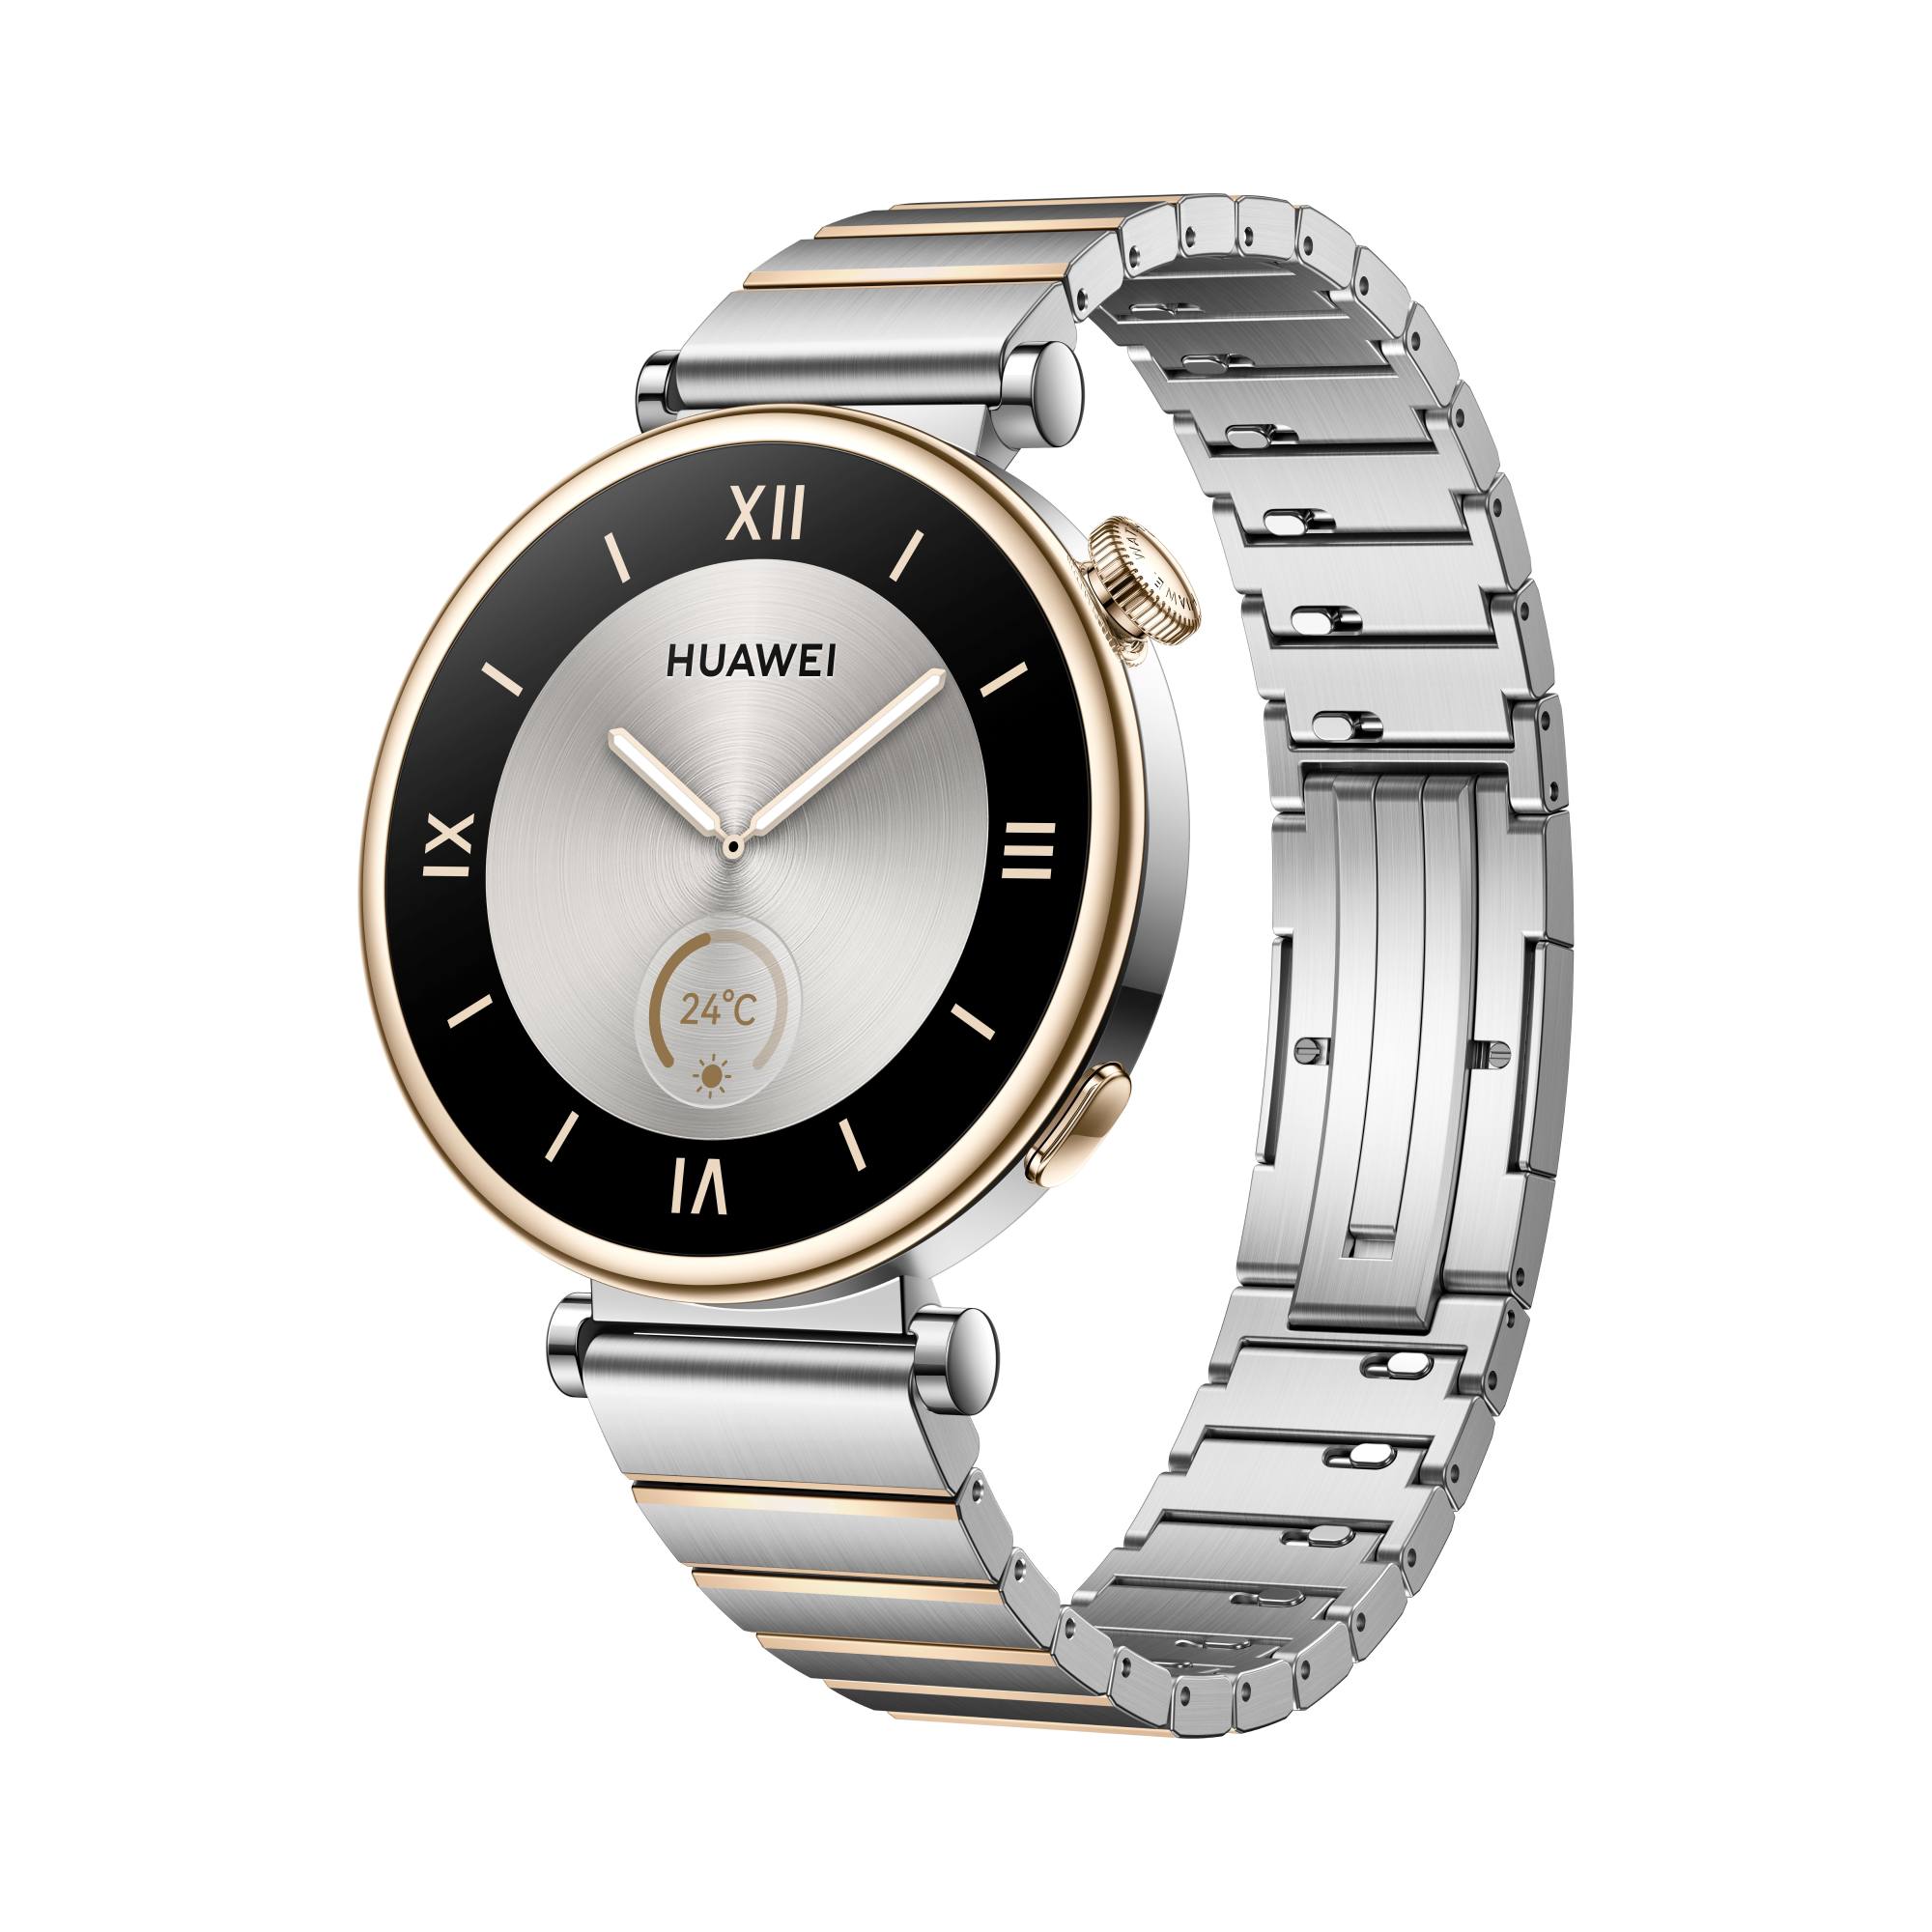 Huawei Watch GT4 son oficiales #celulares #smartphones #smartwatch #an